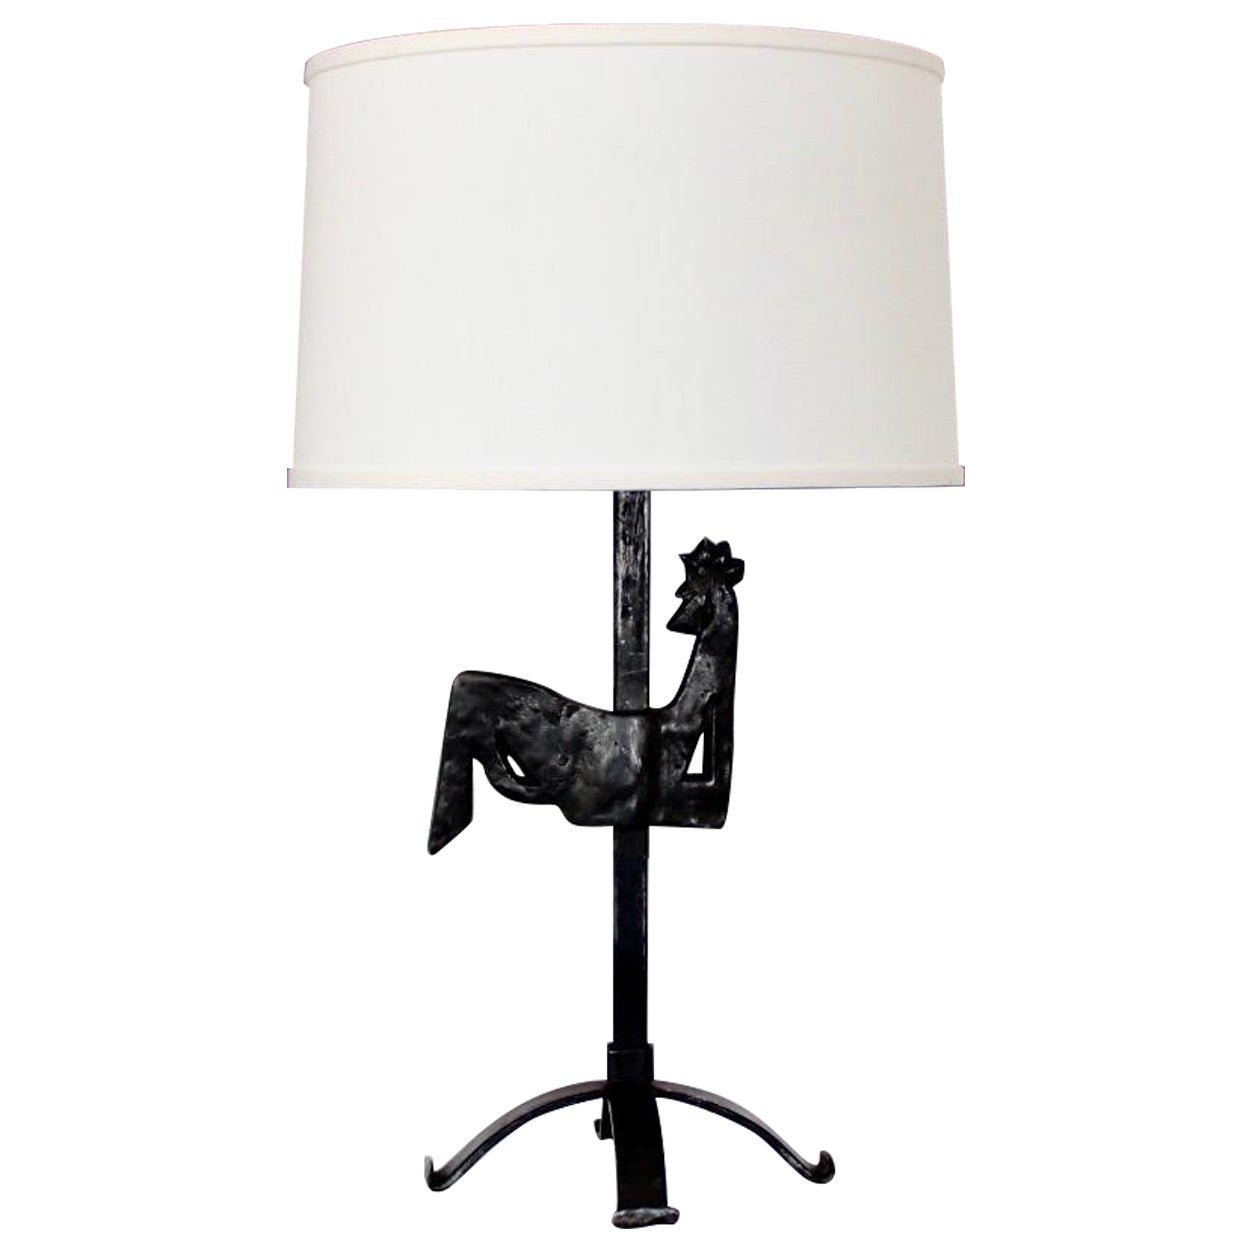 Ateliers Marolles by Jean Touret Table Lamp Wrought Iron 